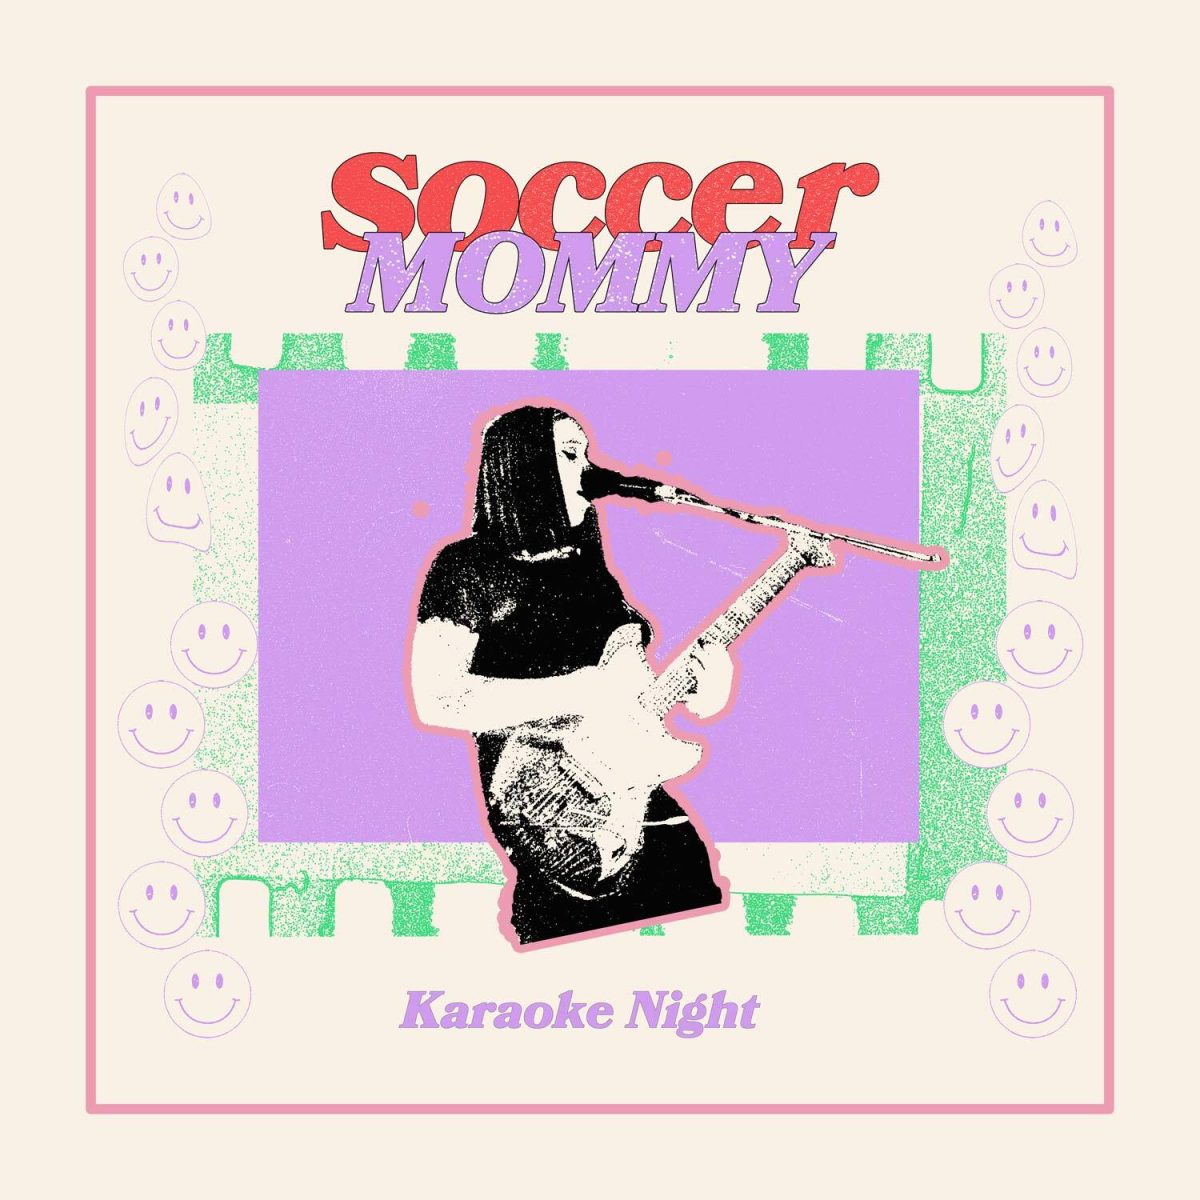 Soccer Mommy gives classic hits new meaning with ‘Karaoke Night’